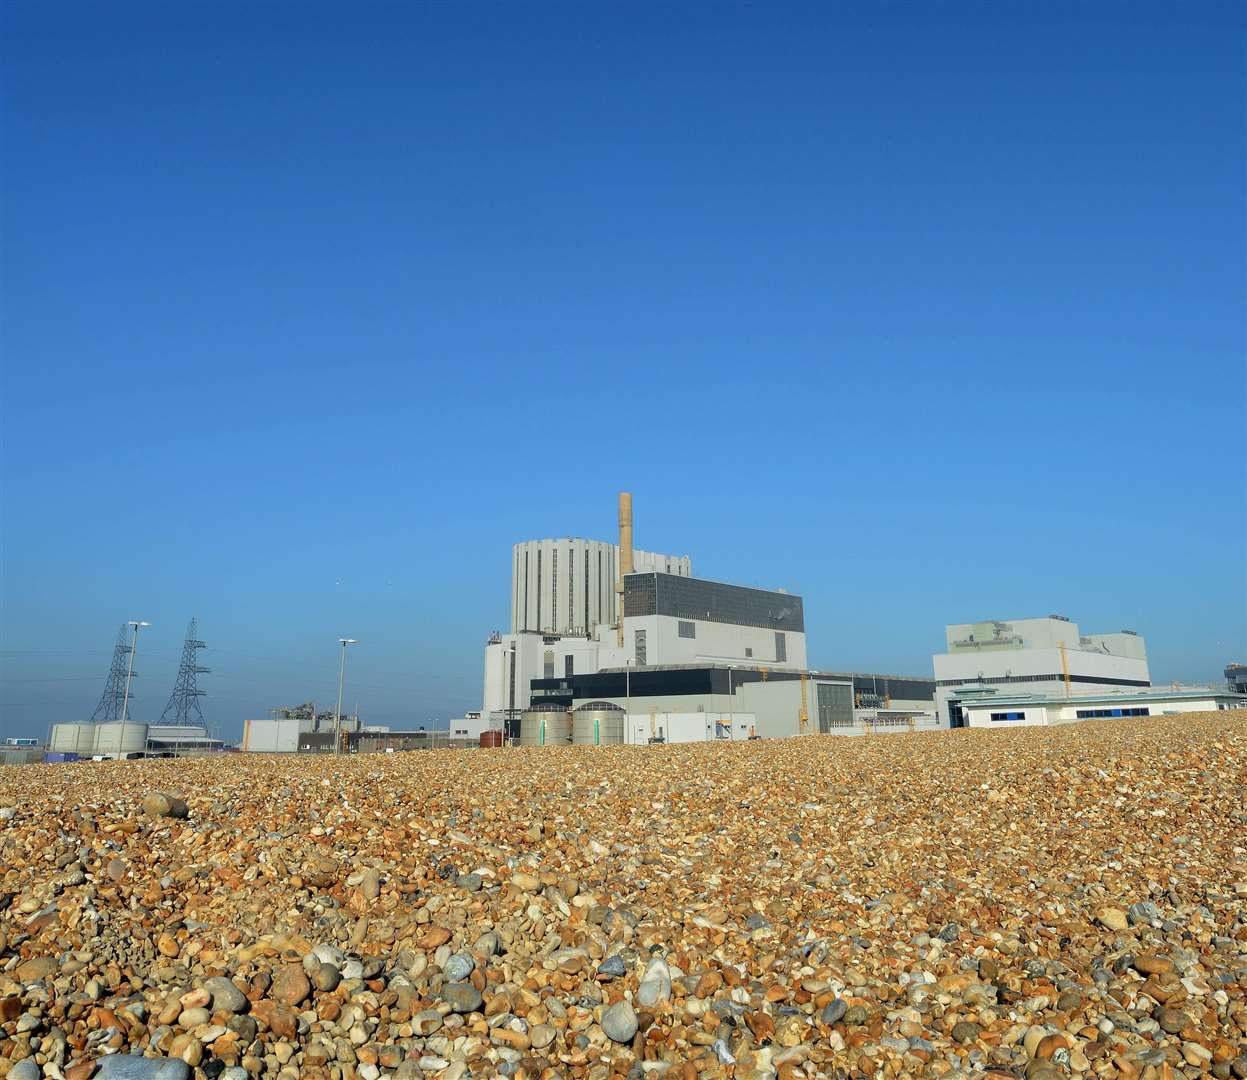 Both reactors at the power station were turned off last year